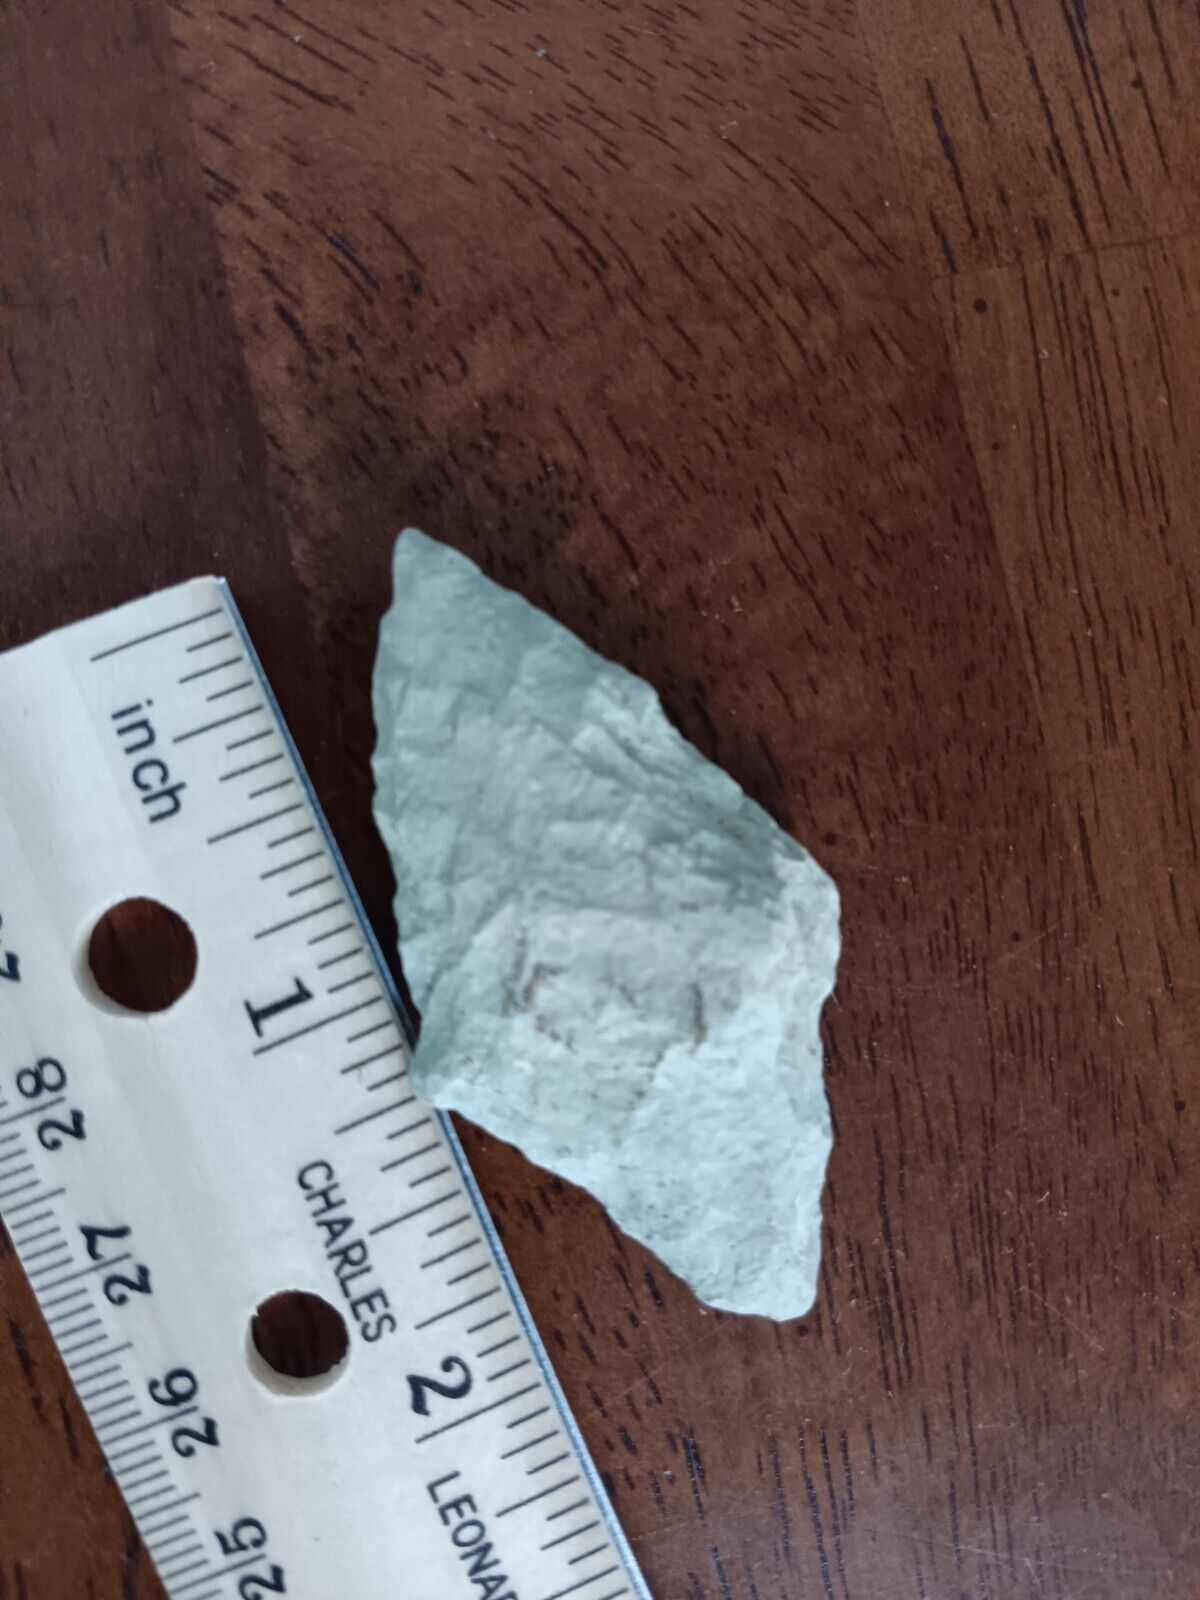 AUTHENTIC NATIVE AMERICAN INDIAN ARTIFACT FOUND, EASTERN N.C.--- ZZZ/41